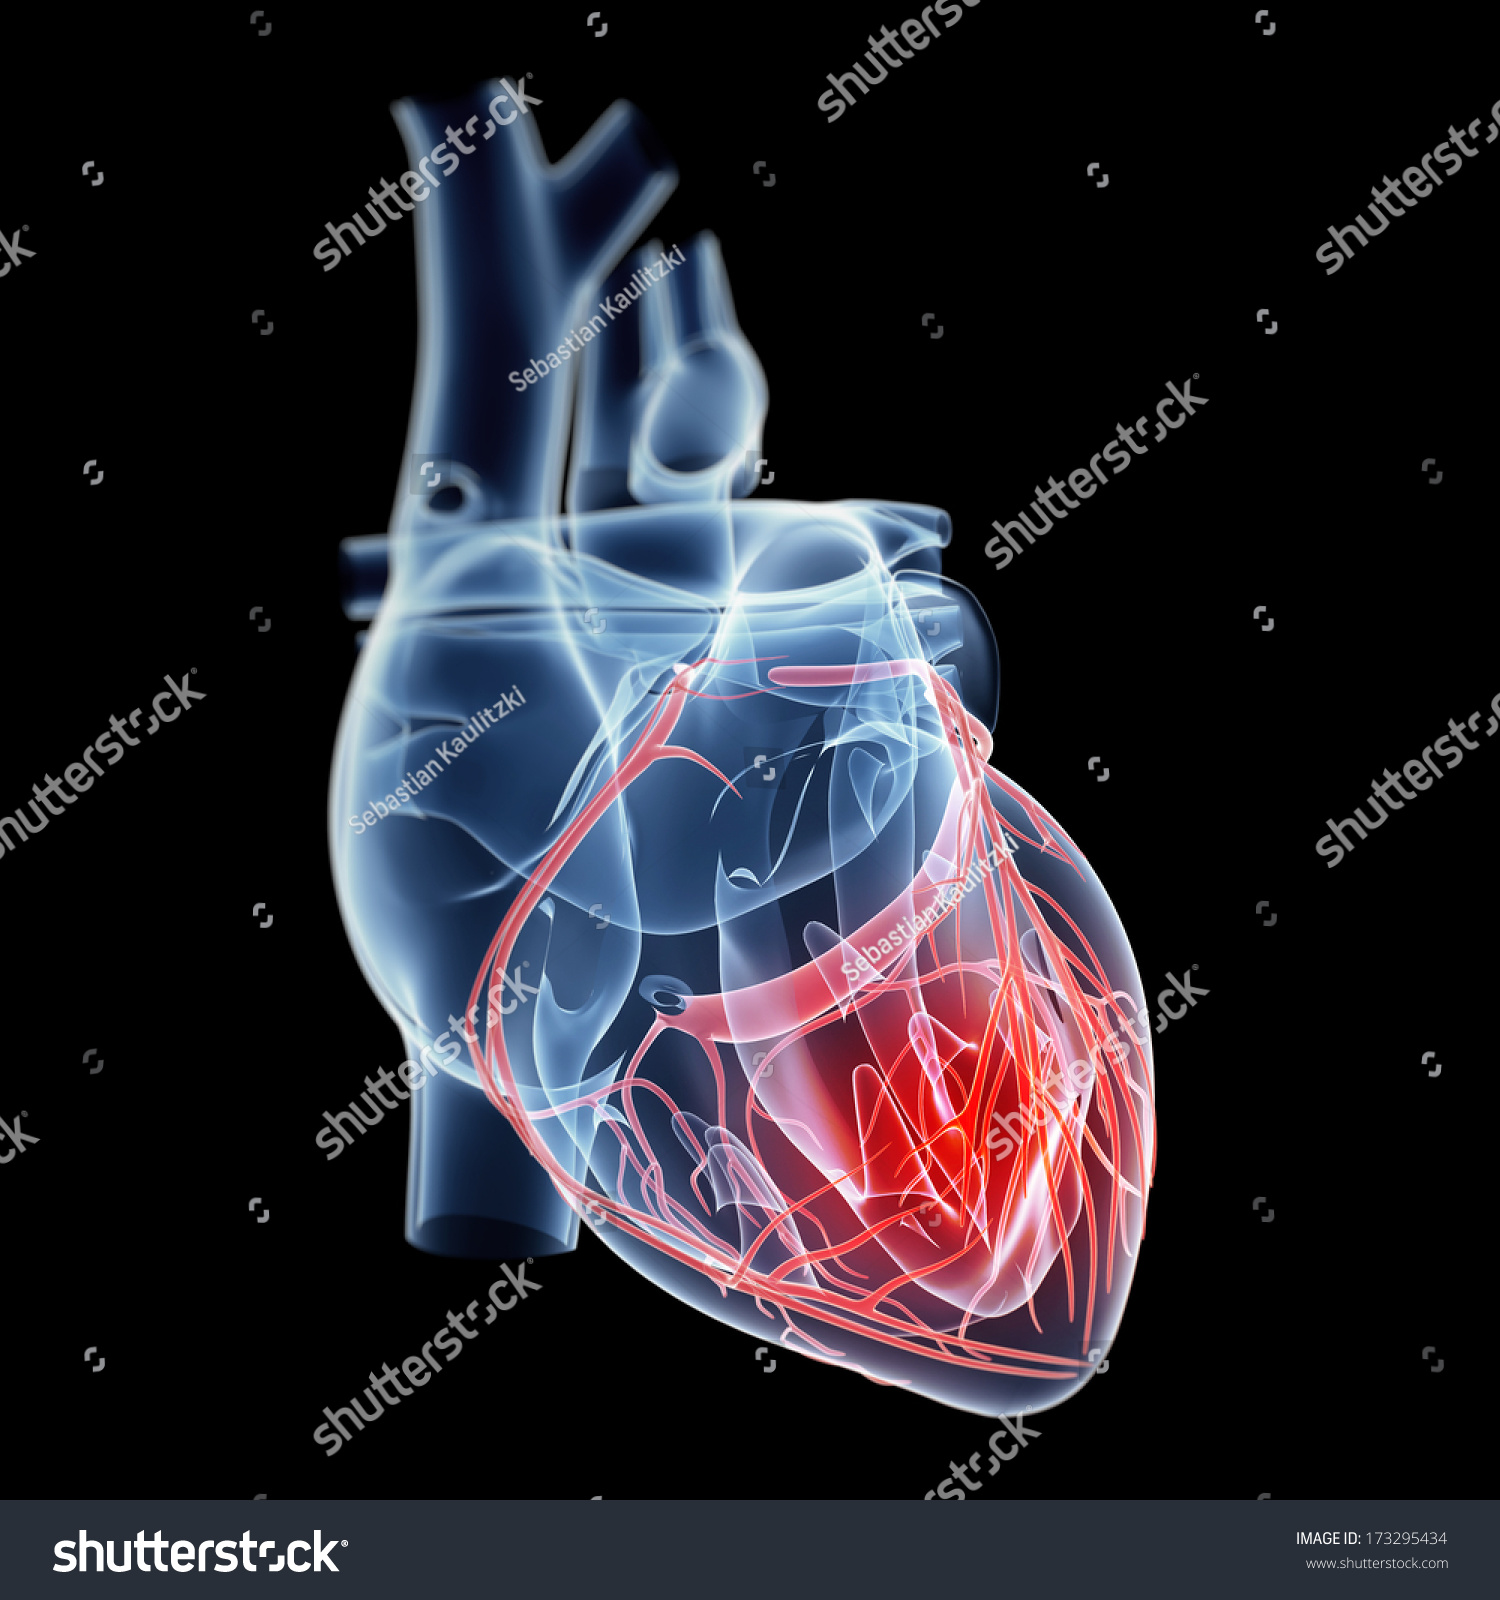 Illustration Showing Pain In The Heart - 173295434 : Shutterstock